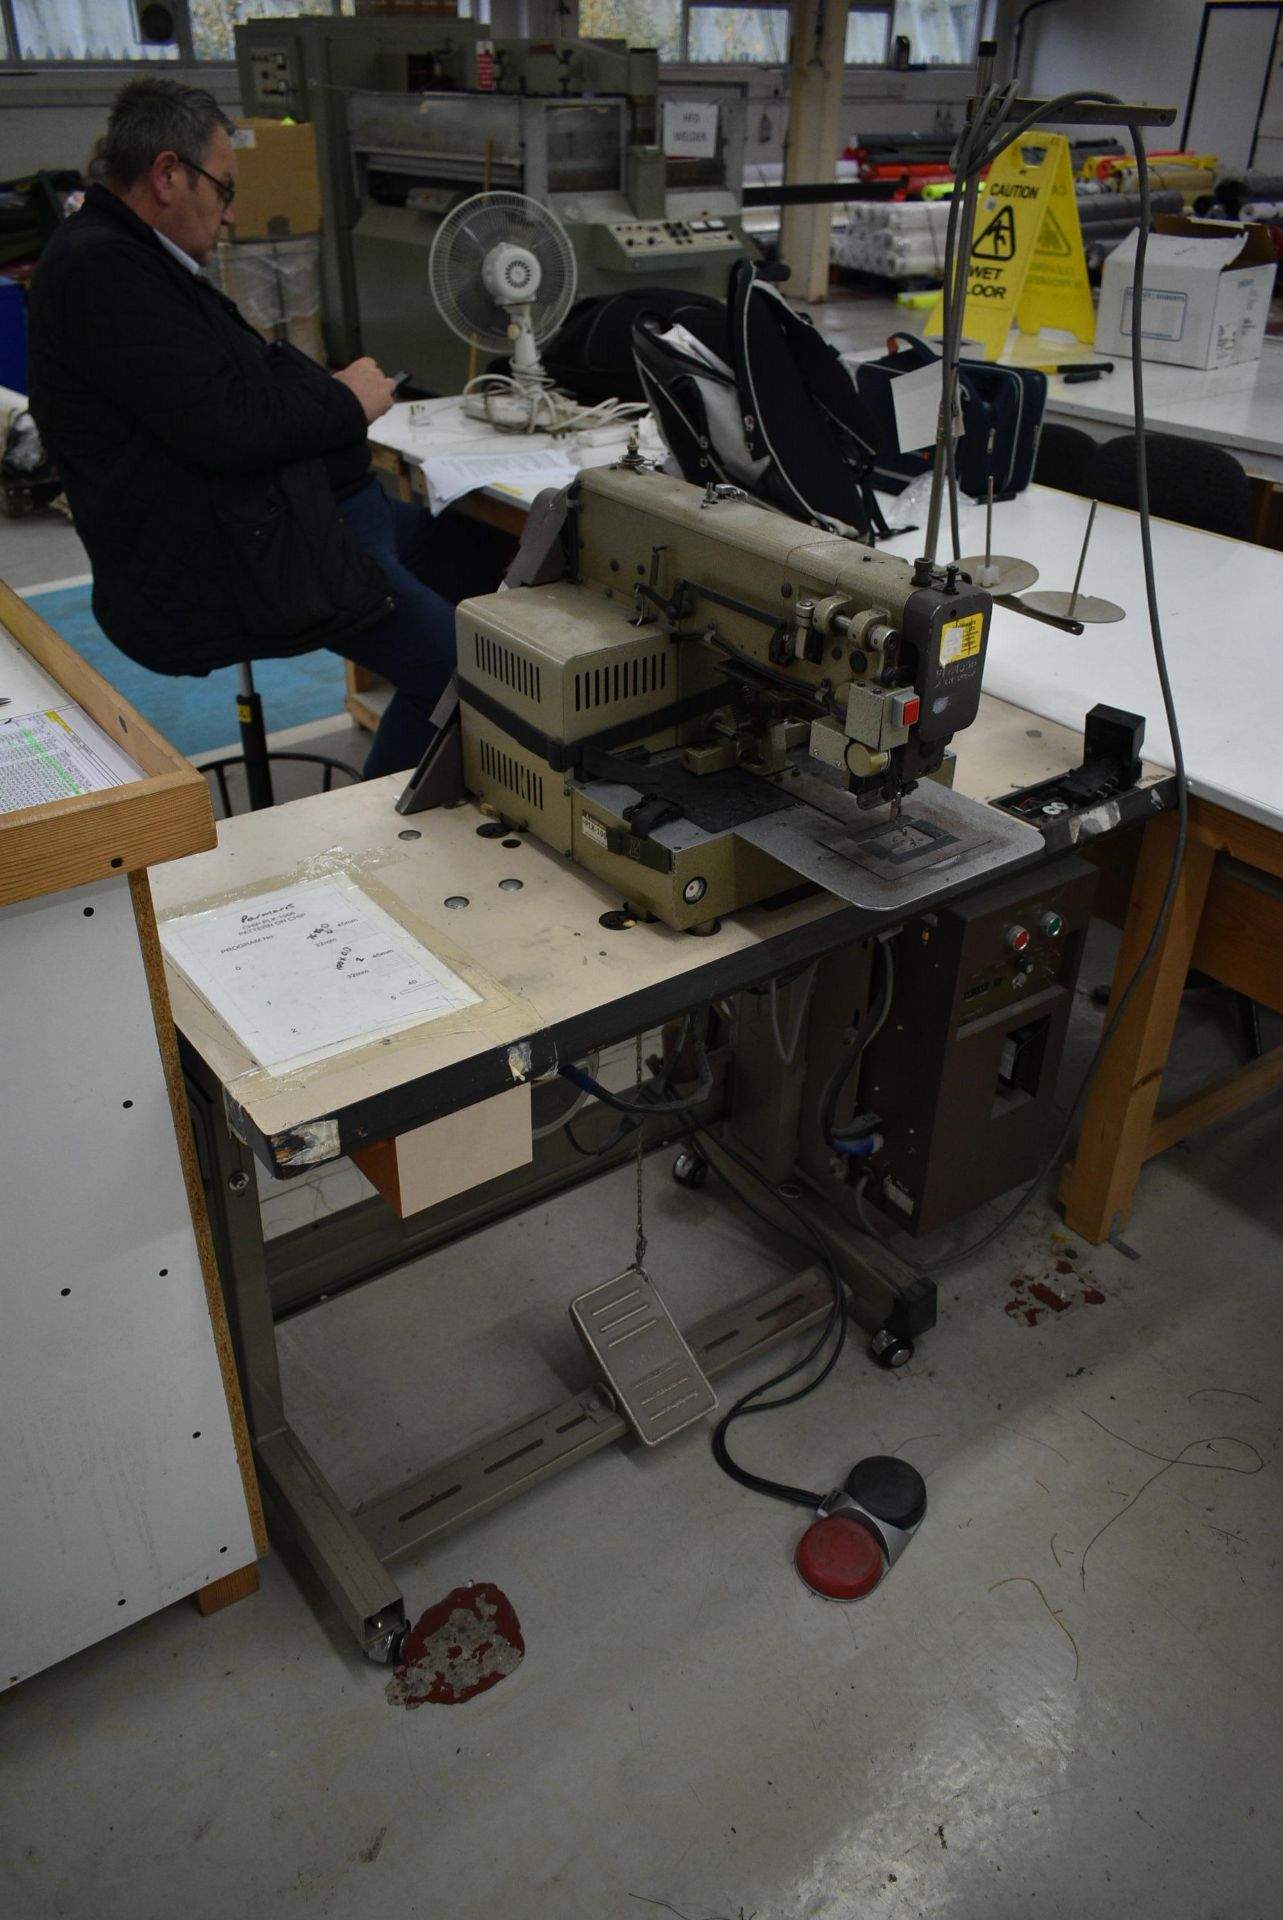 Mitsubishi PLK-10060 PROGRAMMABLE SEWING MACHINE, serial no. 150450, with bench and Limi-Stop Z